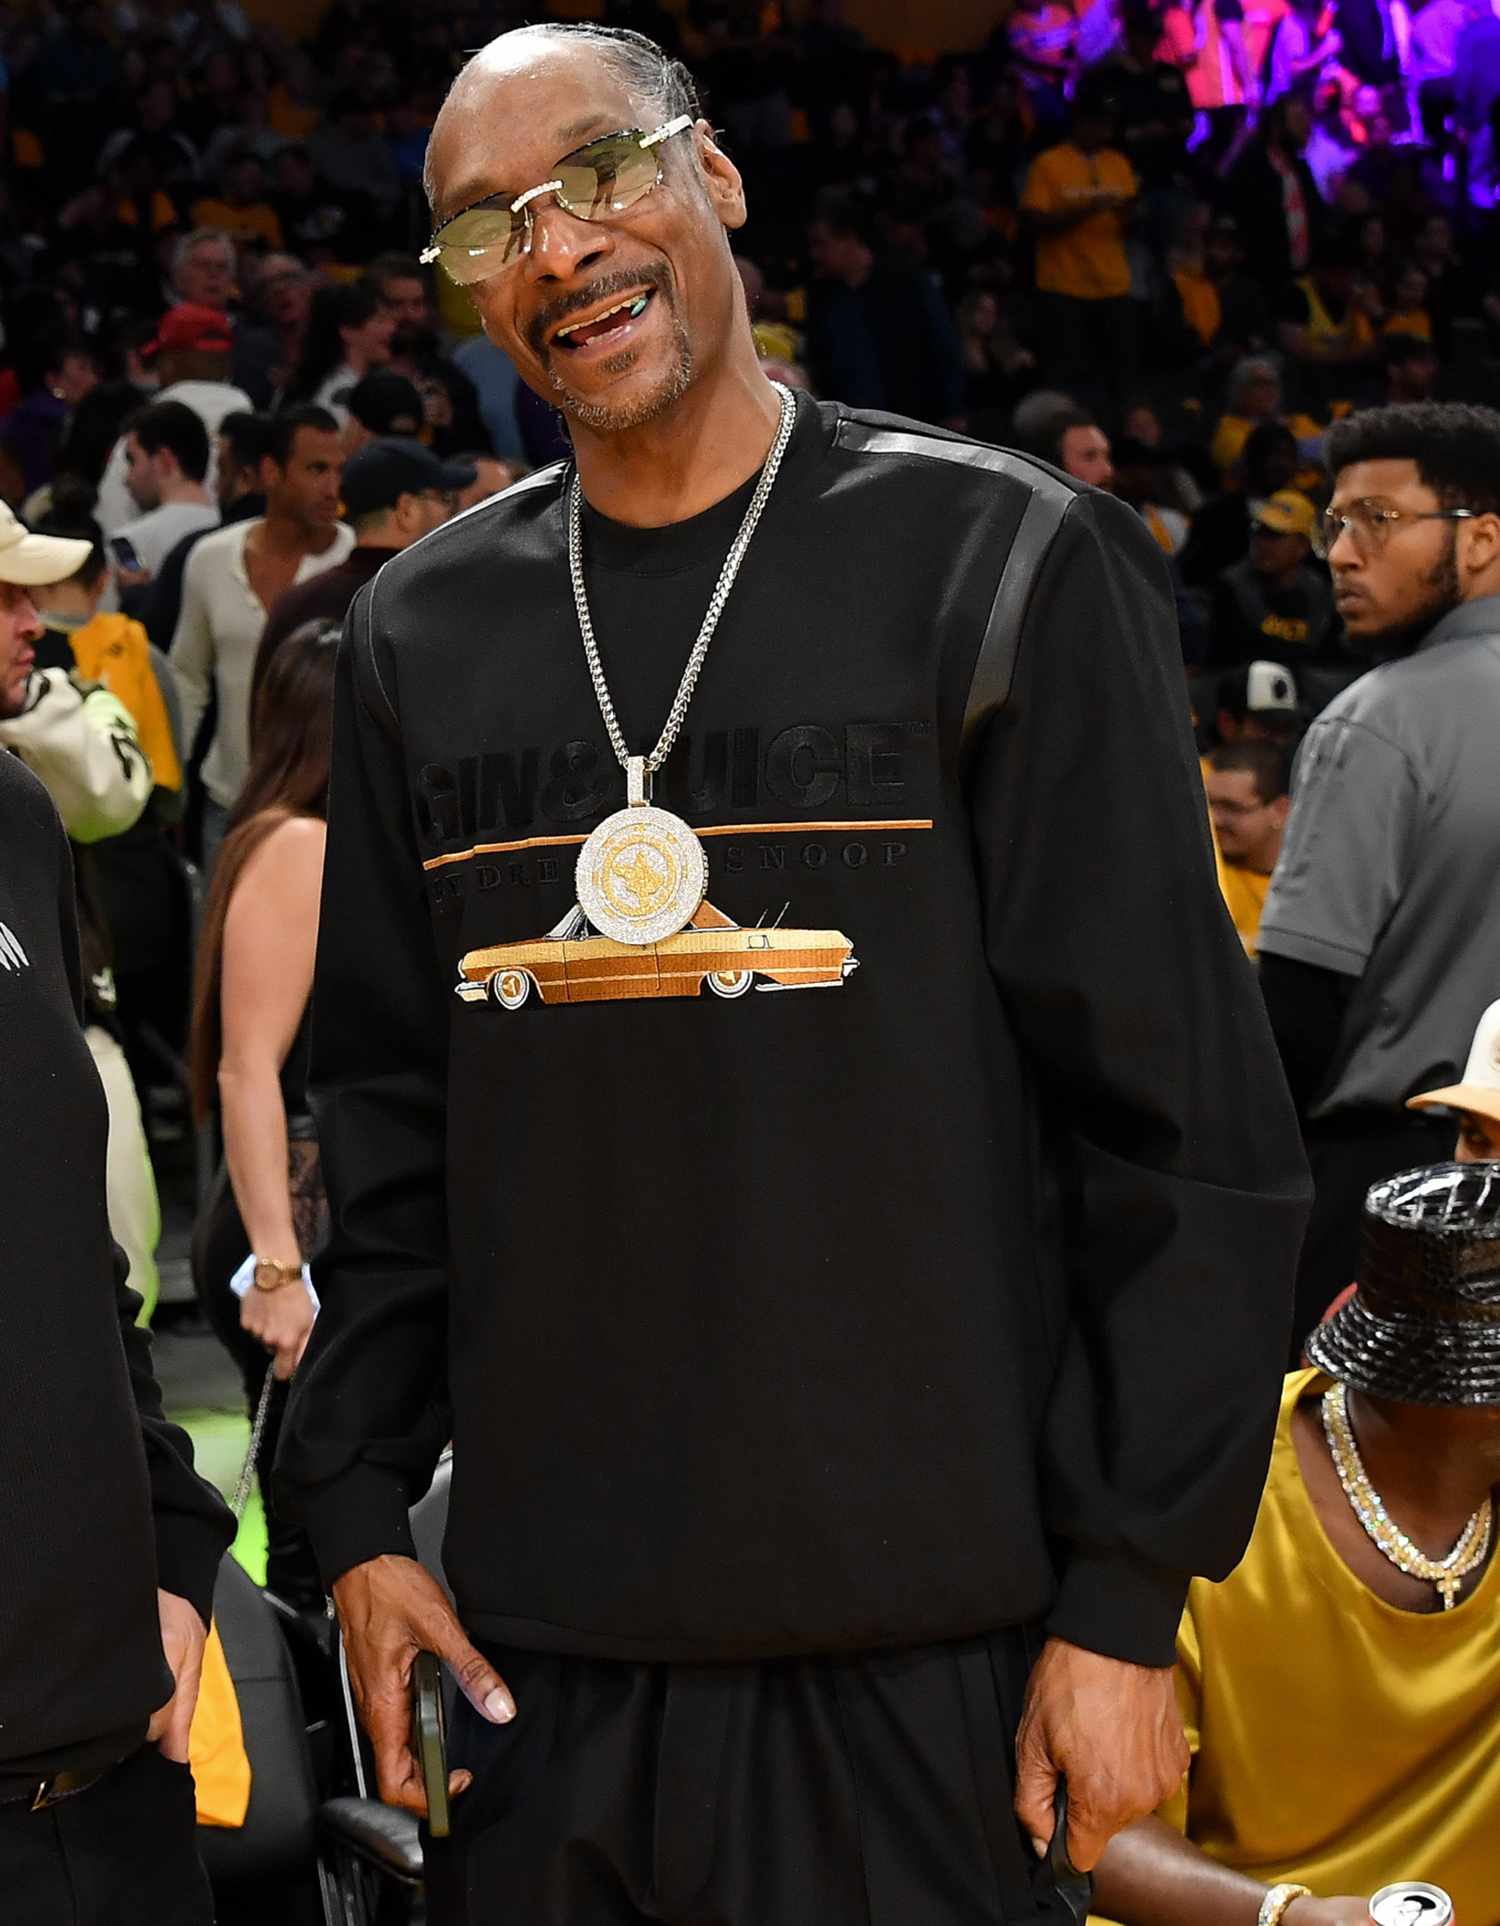 Snoop Dogg attend a basketball game between the Los Angeles Lakers and the Denver Nuggets